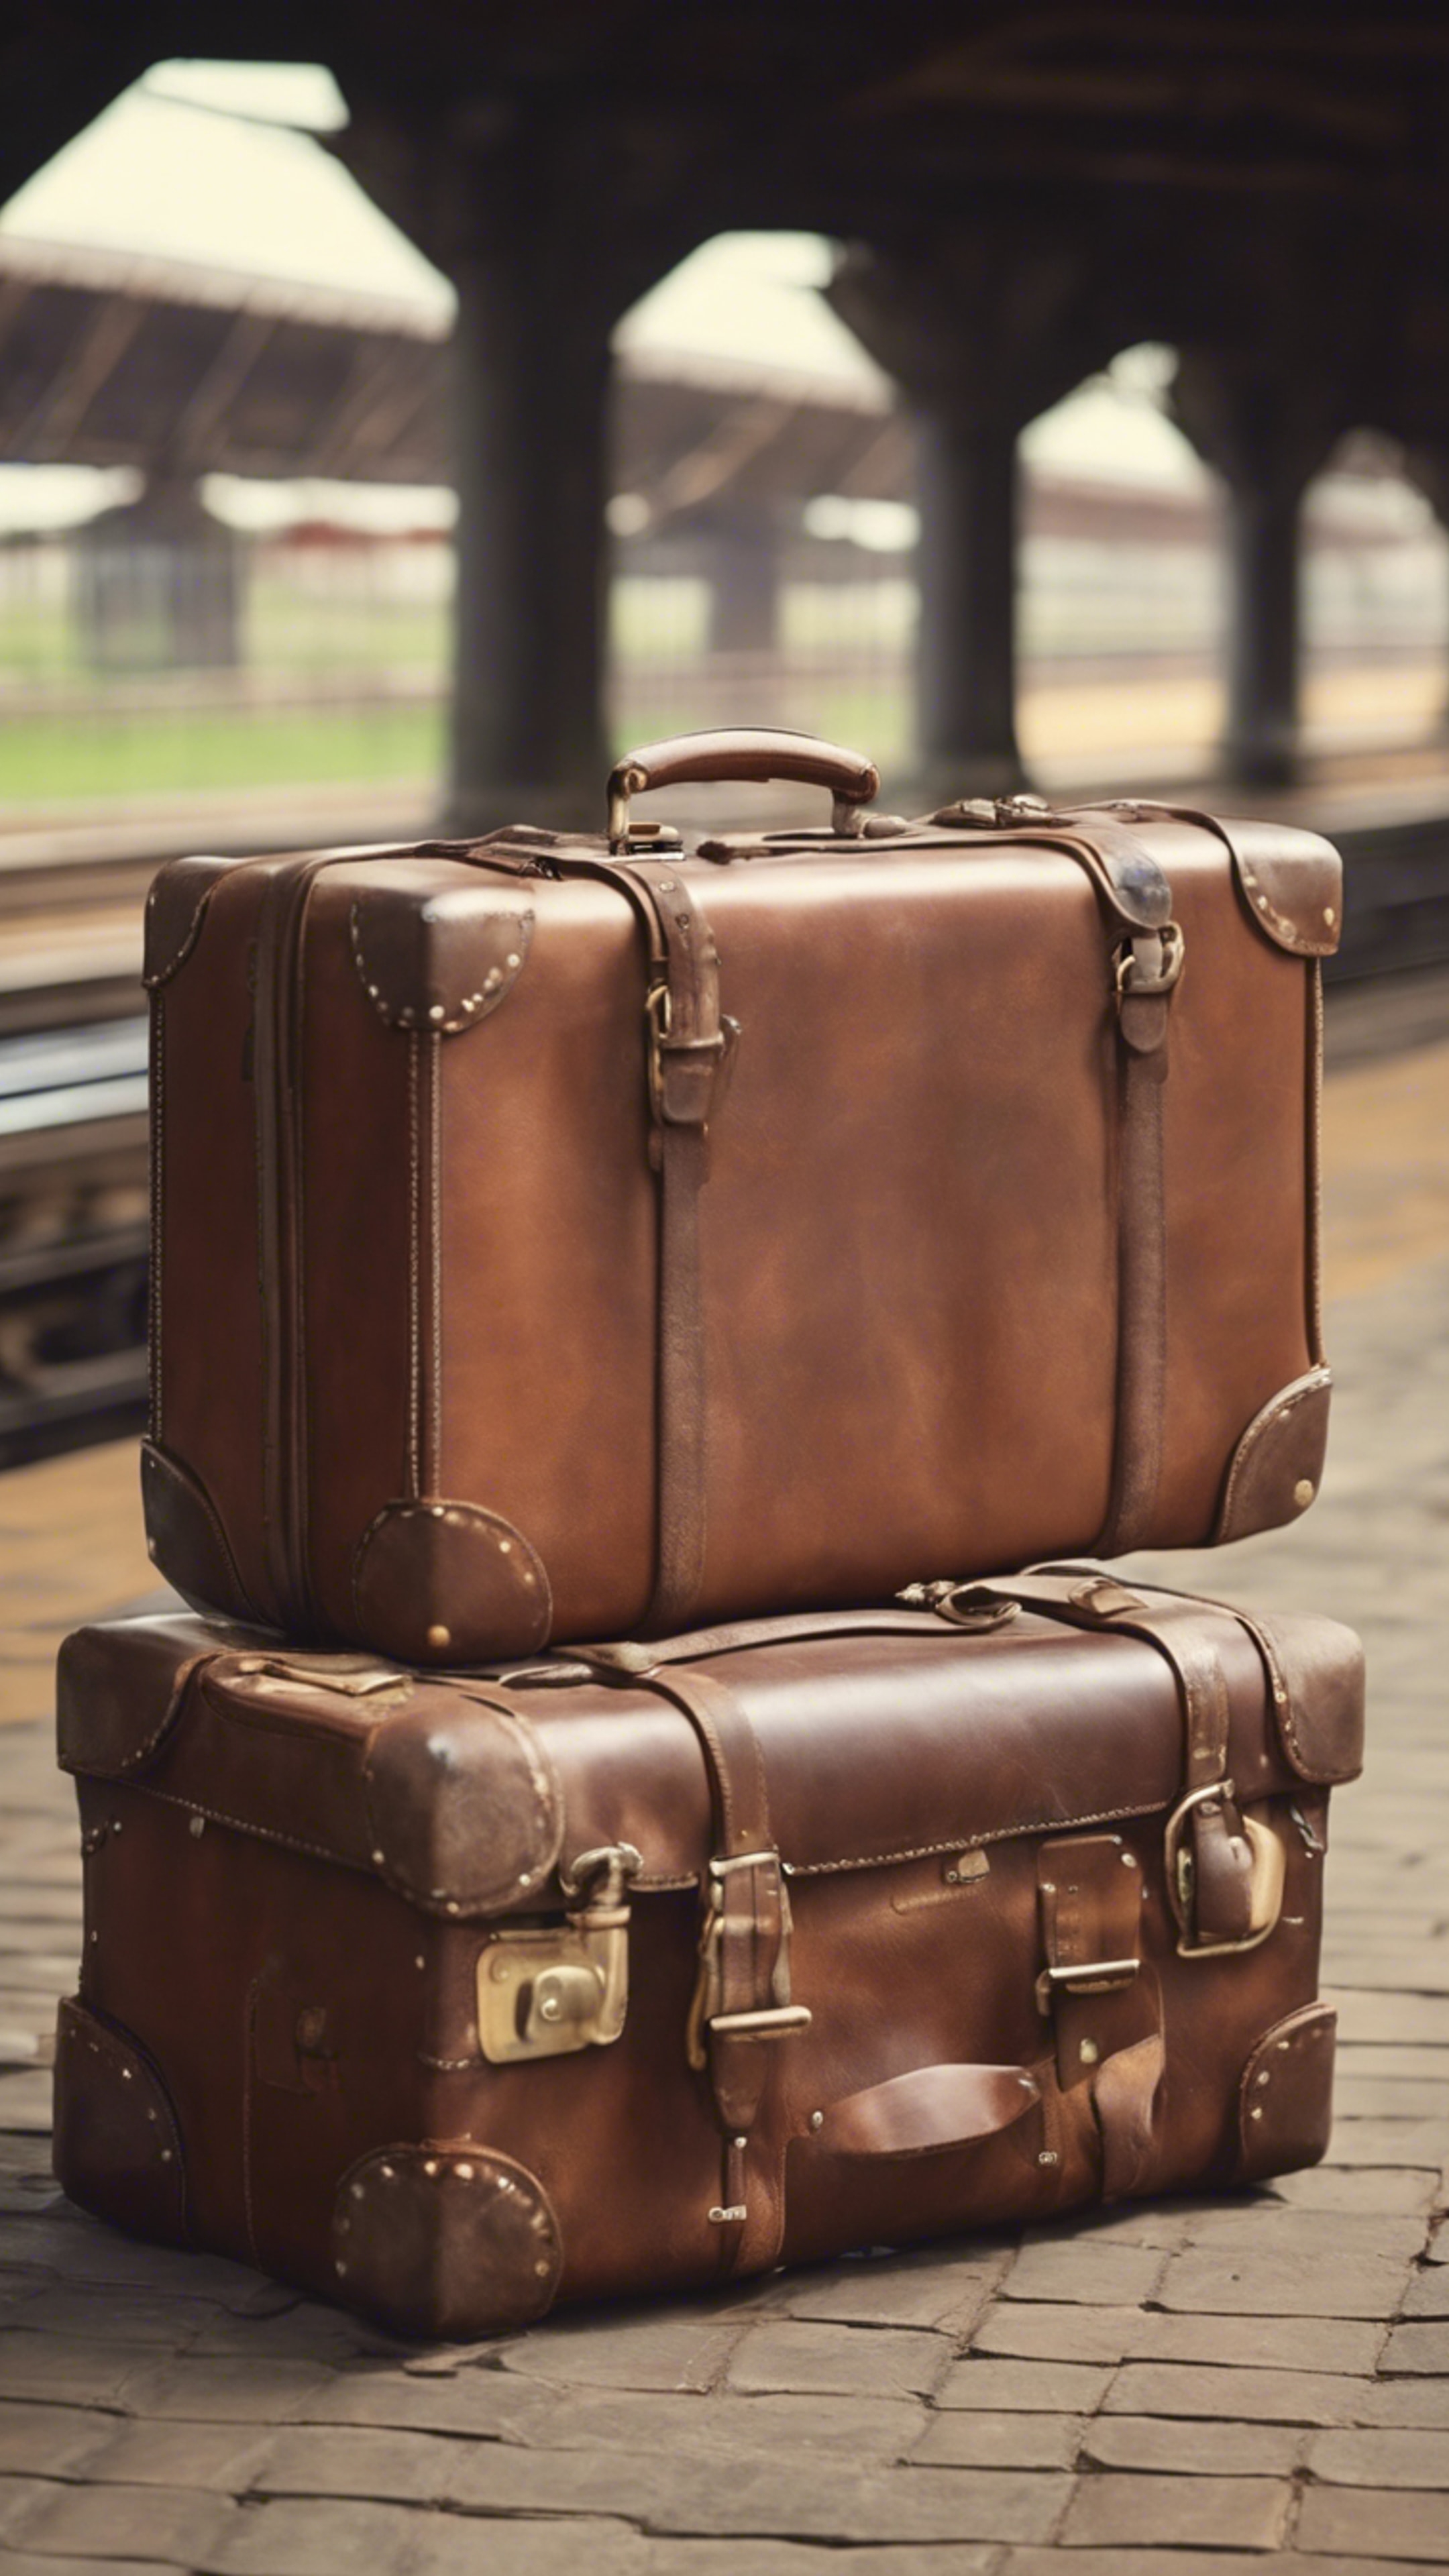 A rustic brown leather suitcase with travel tags, sitting at a quaint railway station. วอลล์เปเปอร์[6b7e956de06740cdbd0e]